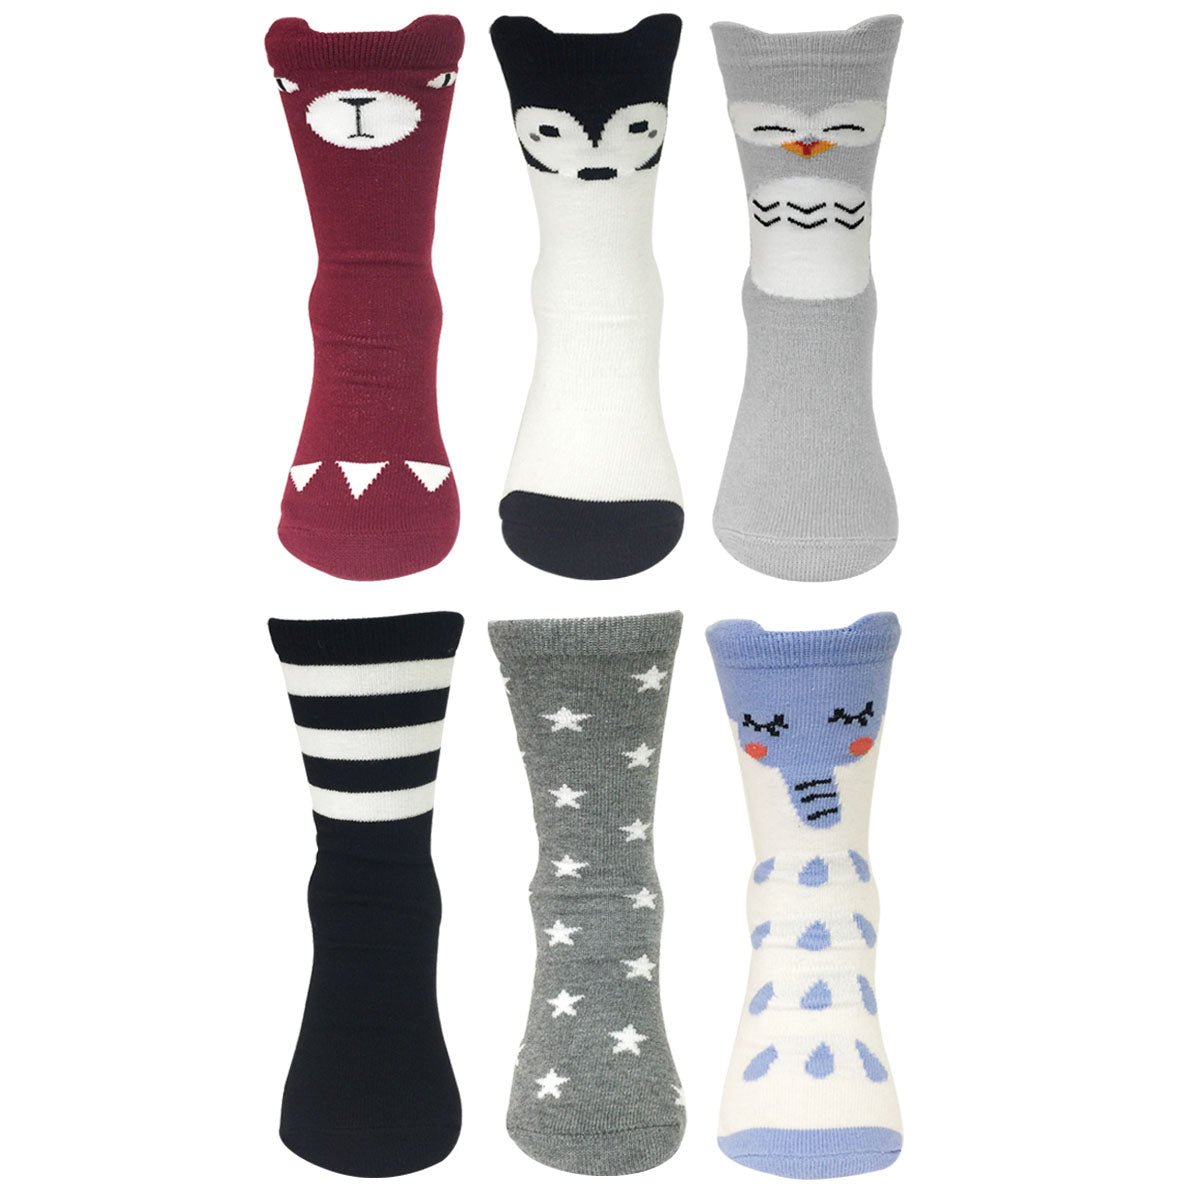 Wrapables My Best Buddy Socks for Baby (Set of 6), Nocturnal Friends